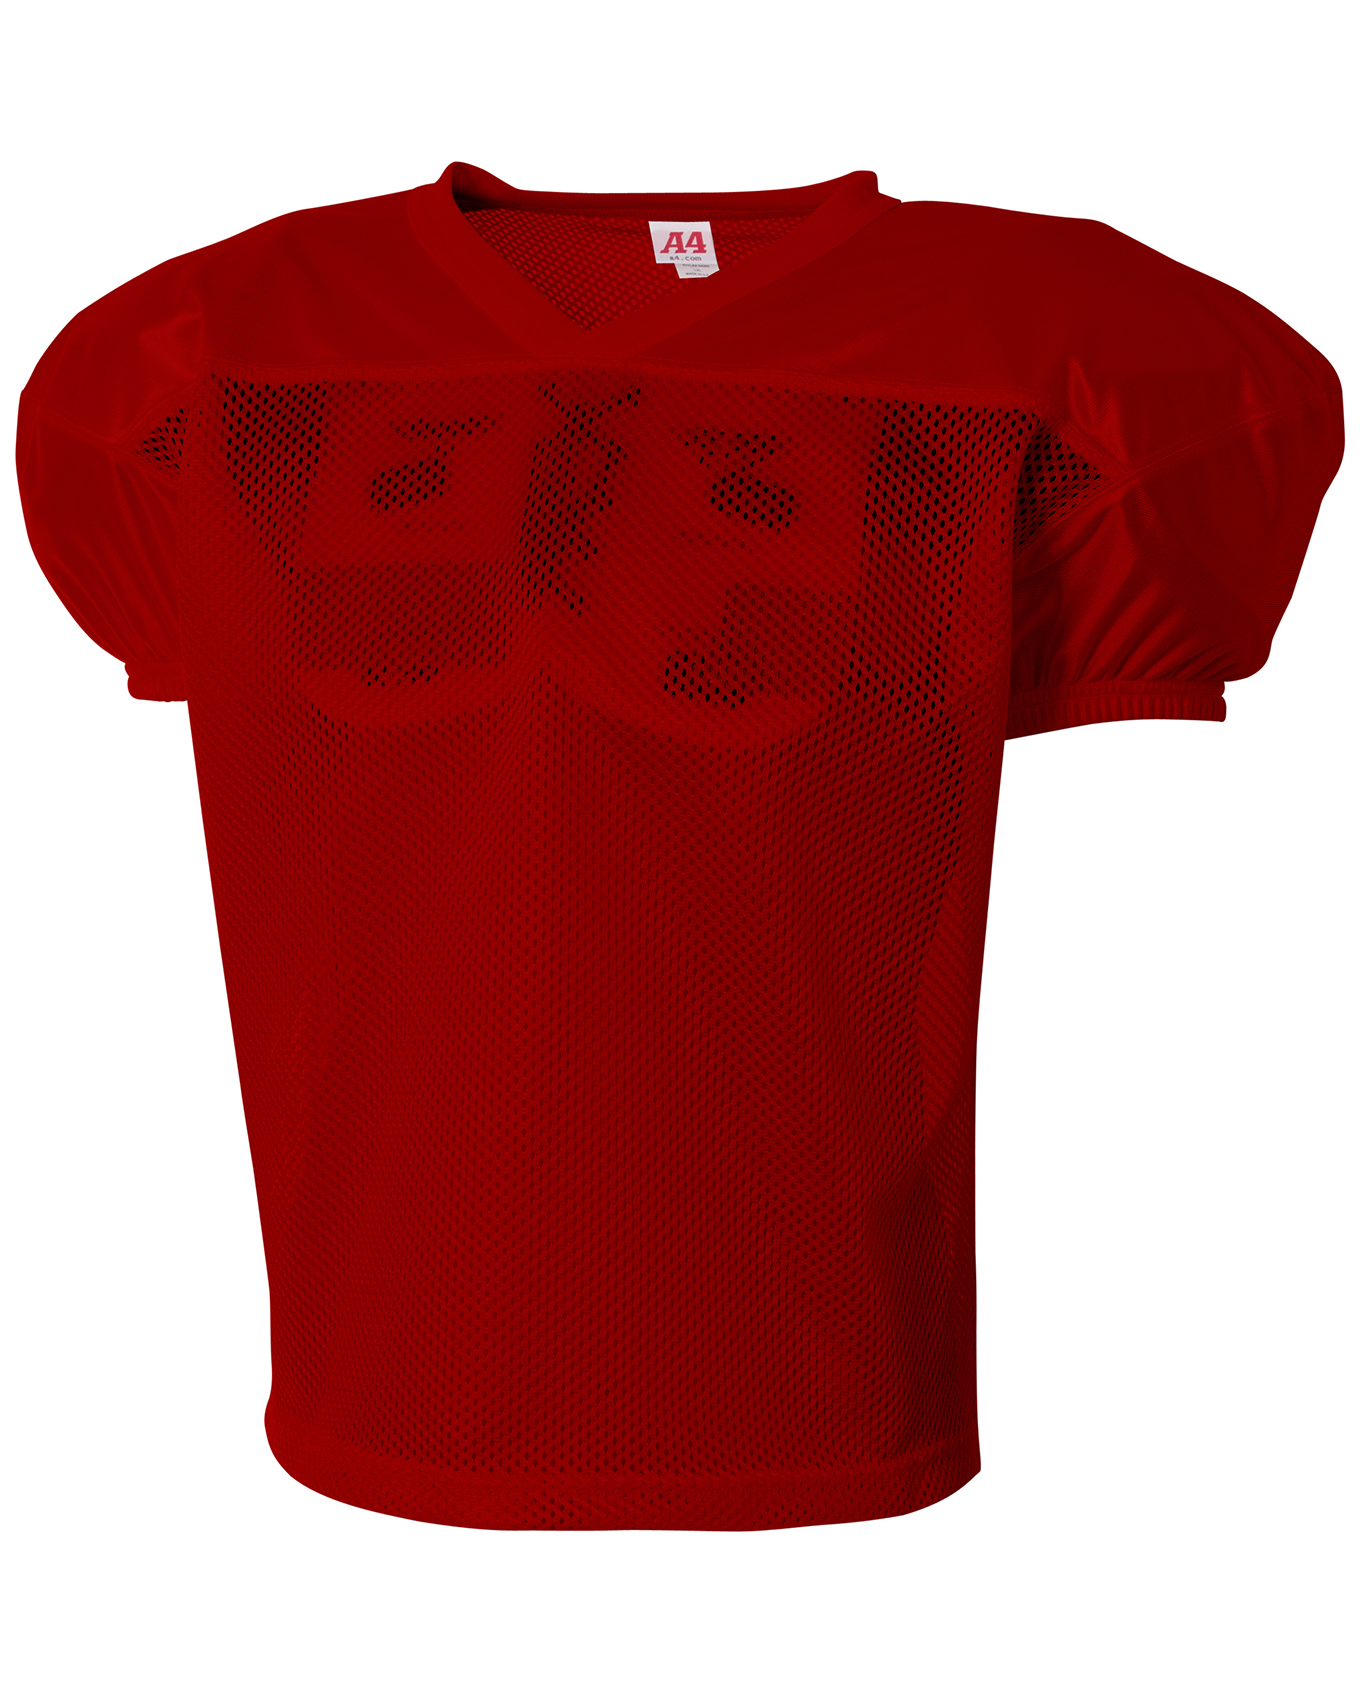 Champion Mesh Football Practice Jersey, Maroon, Youth L / XL Free Shipping!